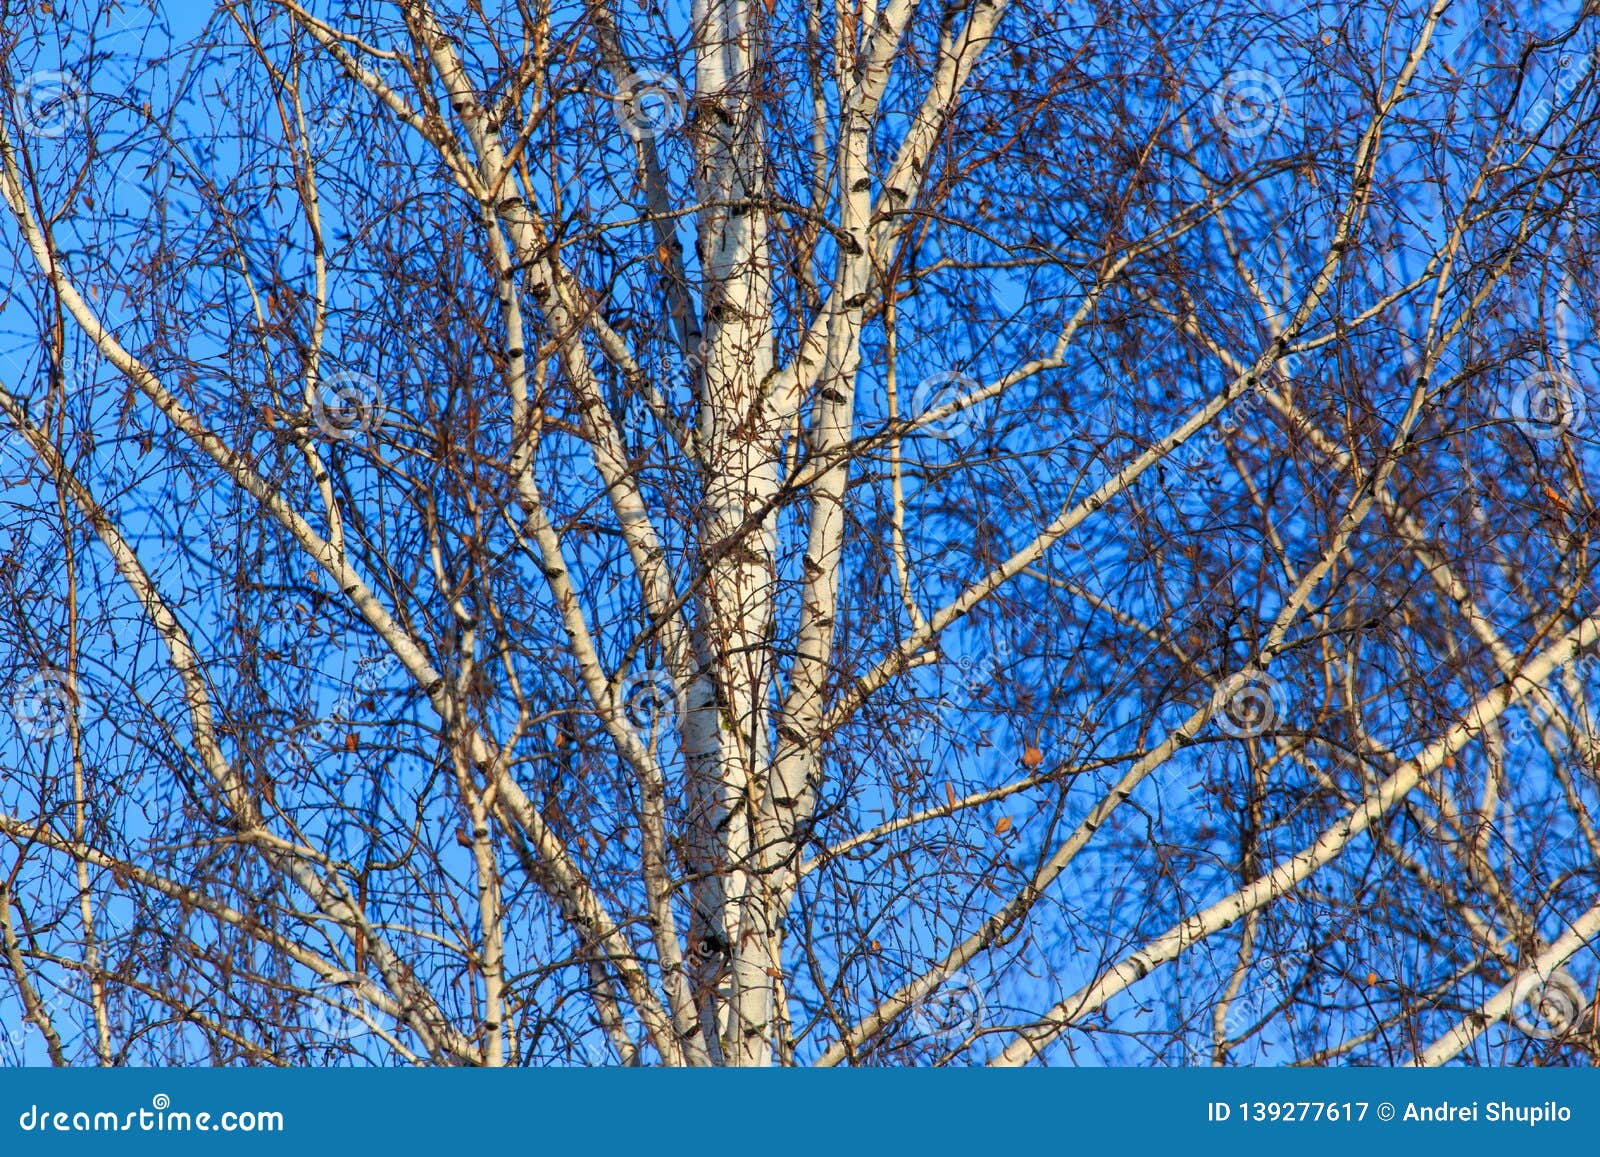 Naked Birch In Winter Against The Background Of Blue Sky 